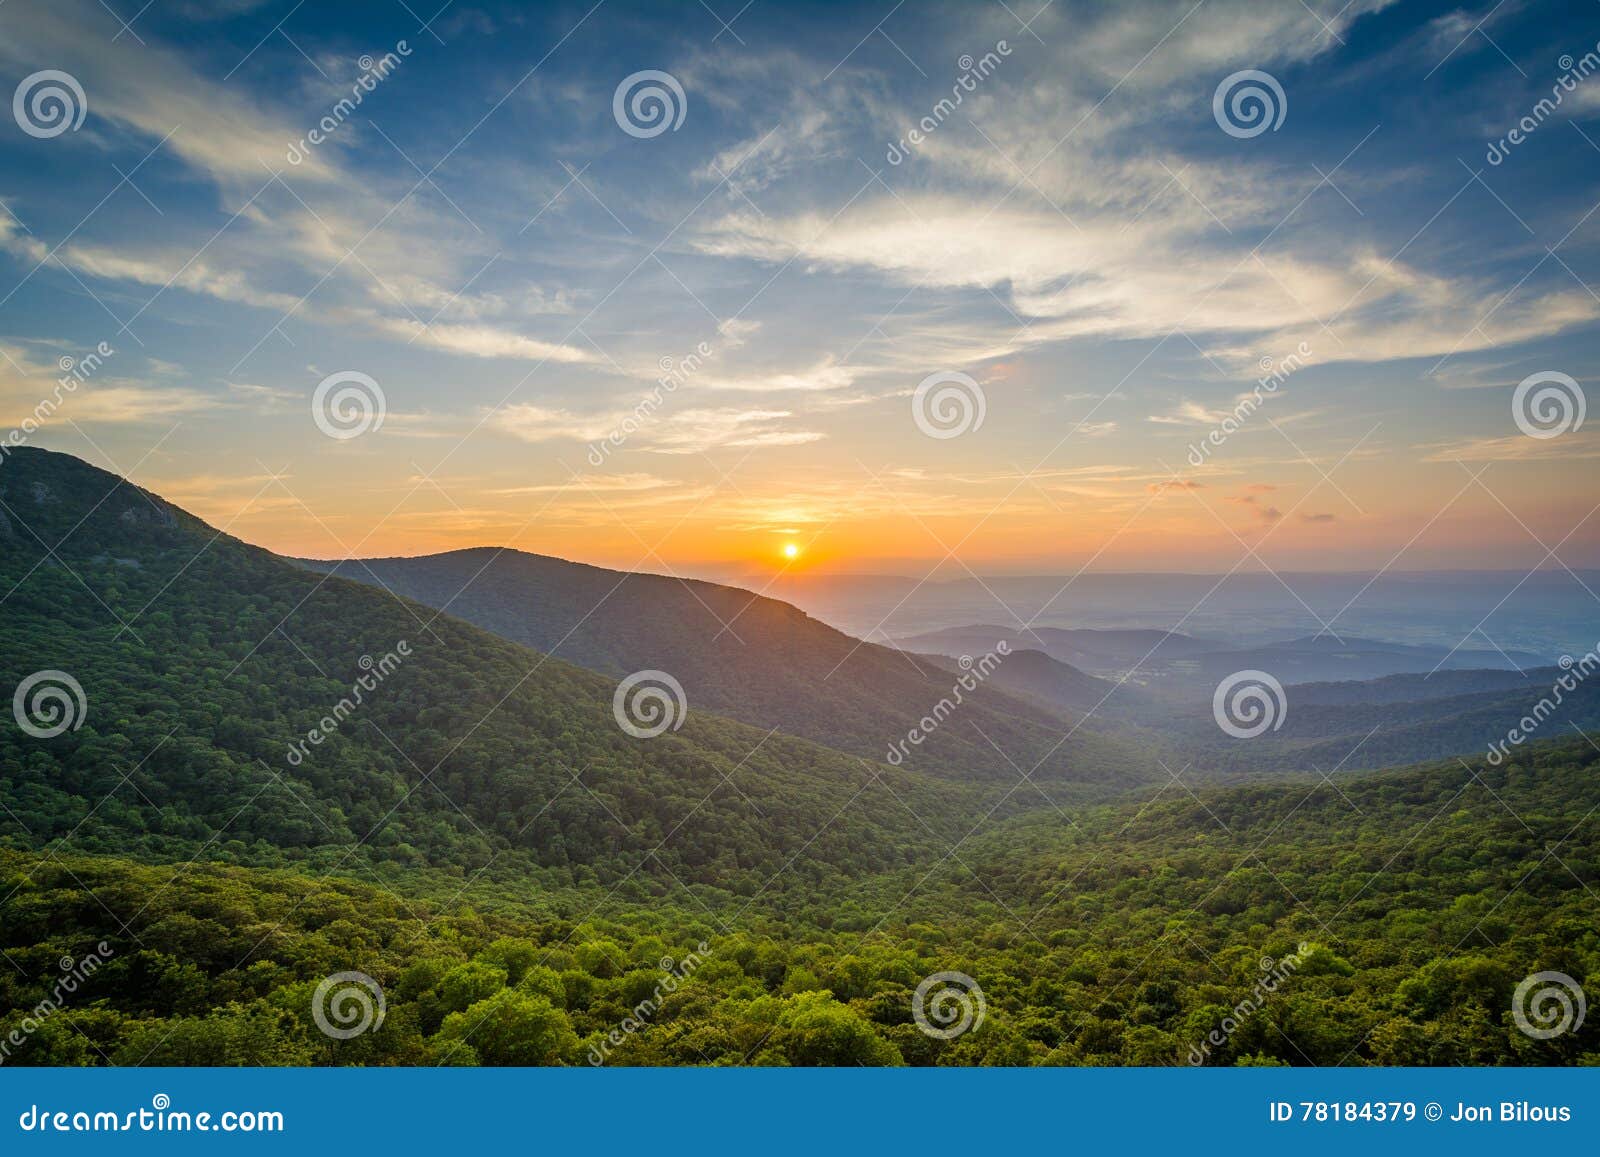 sunset over the shenandoah valley and blue ridge mountains from